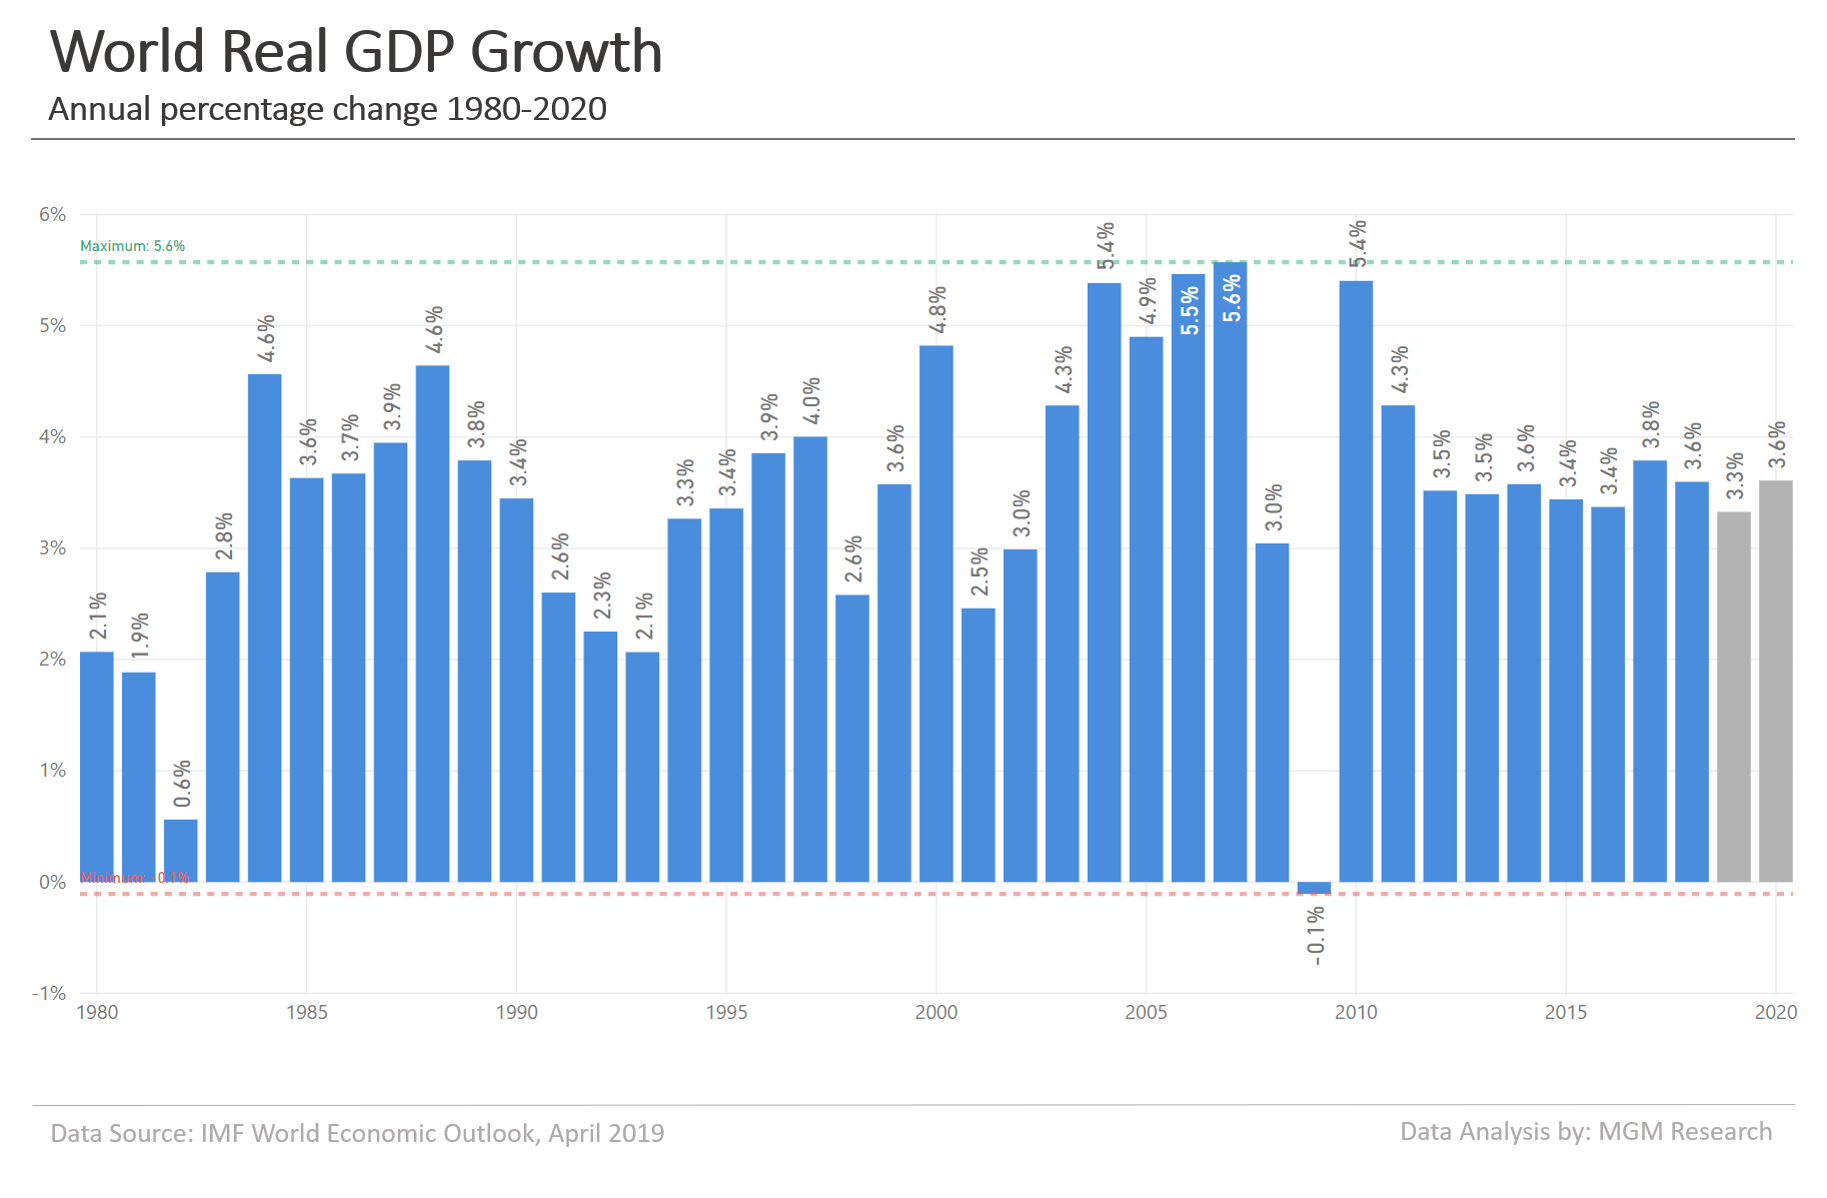 World real GDP growth 1980-2020